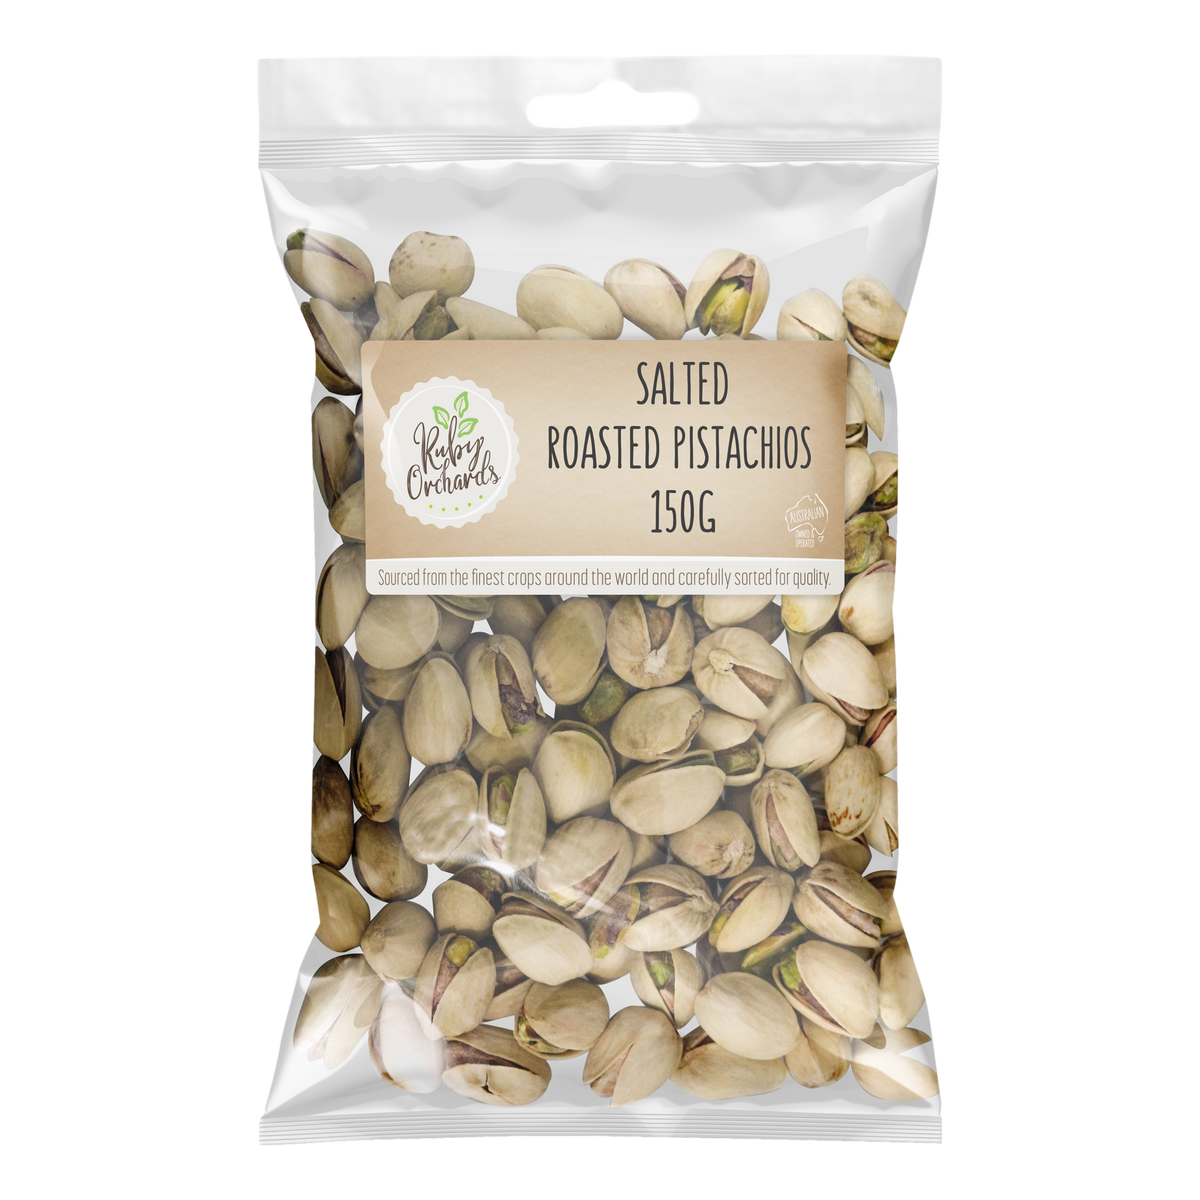 Ruby Orchards Salted Roasted Pistachios 150g